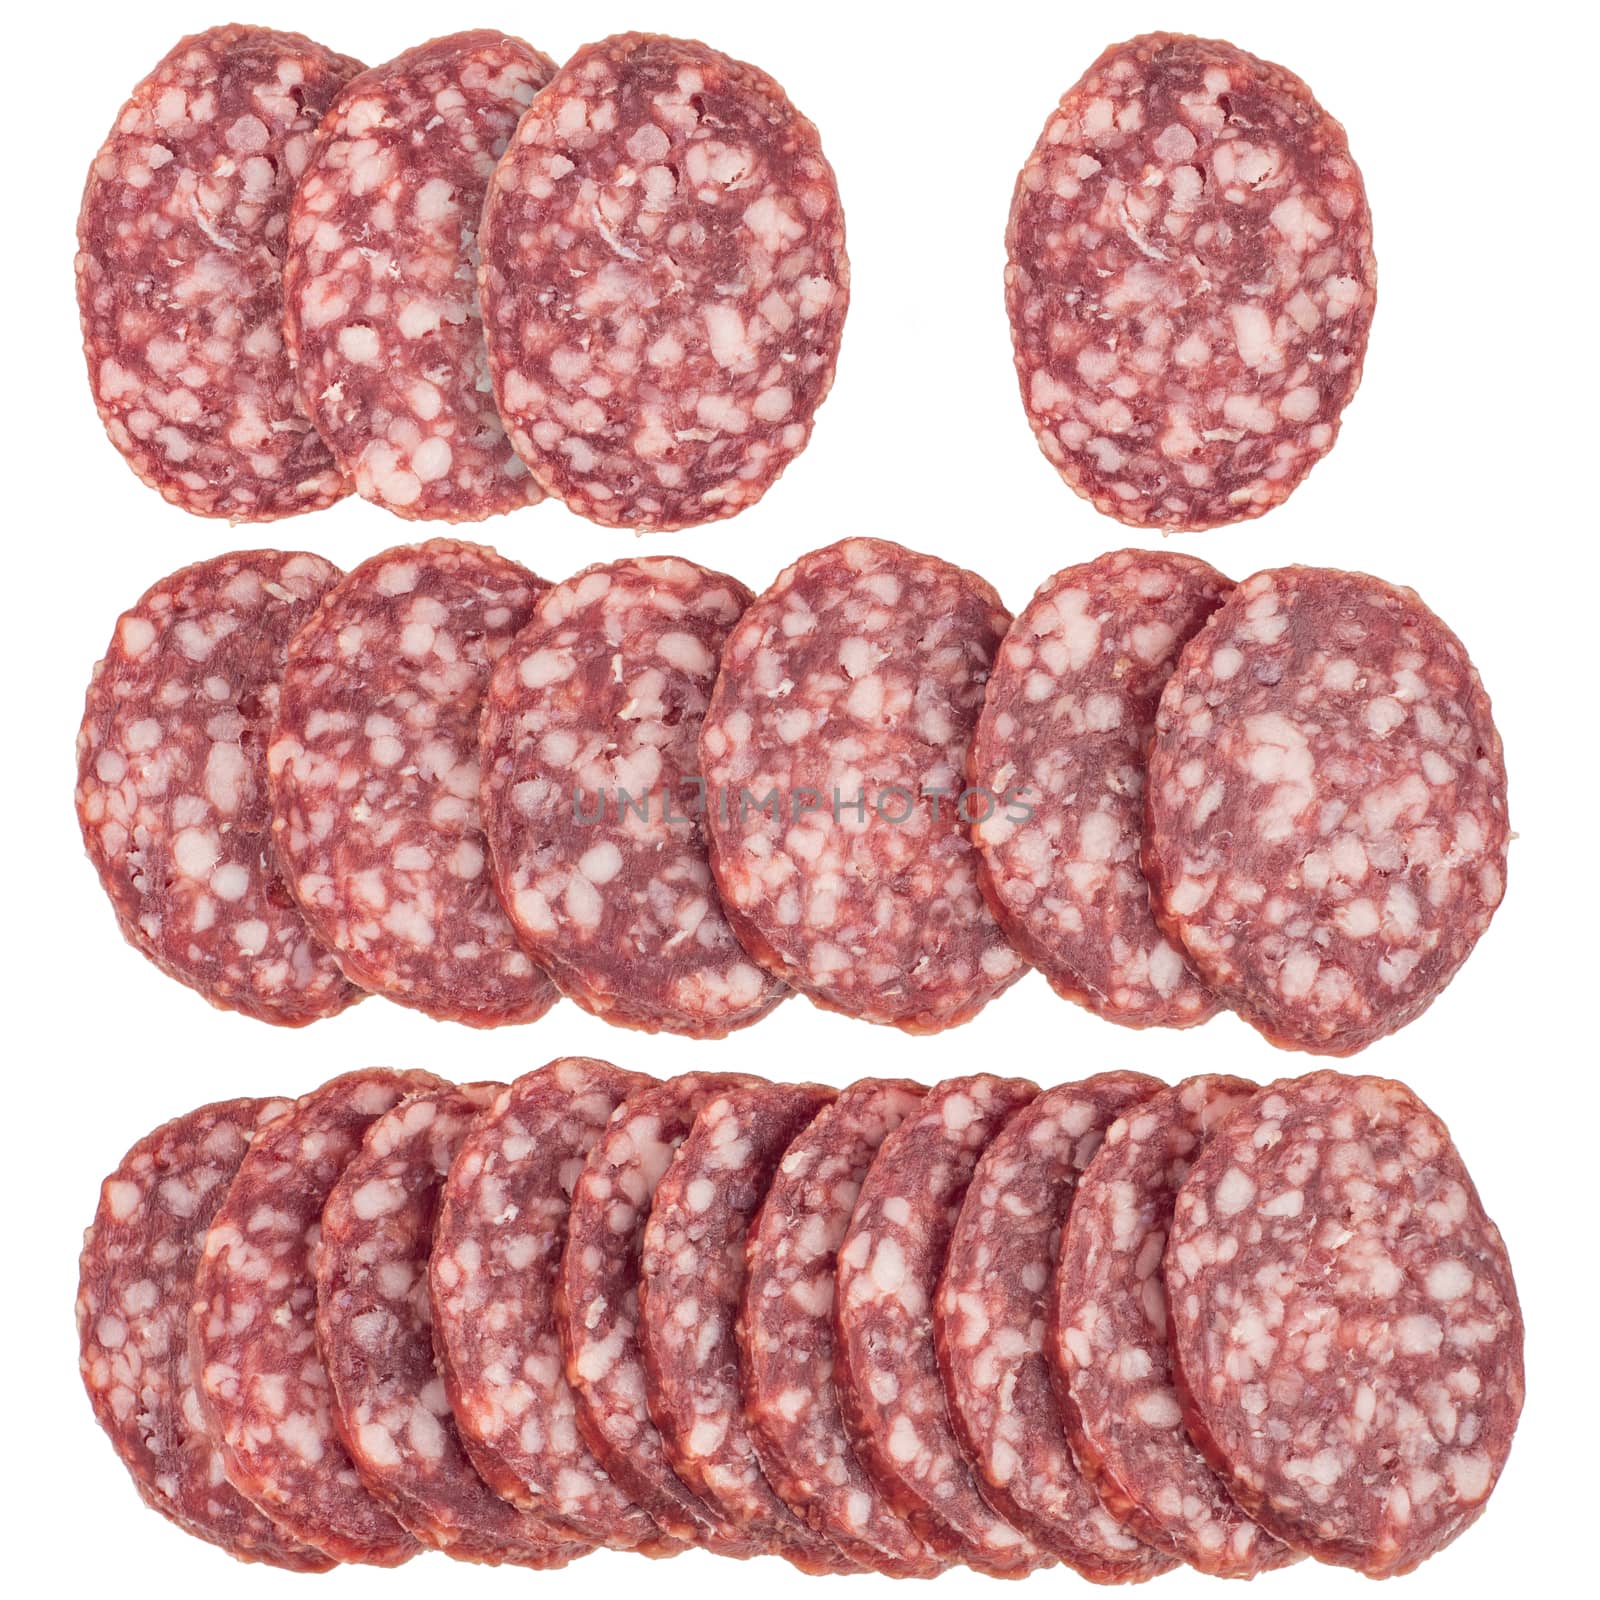 Slices of salami sausages isolated on a white background. Top view.